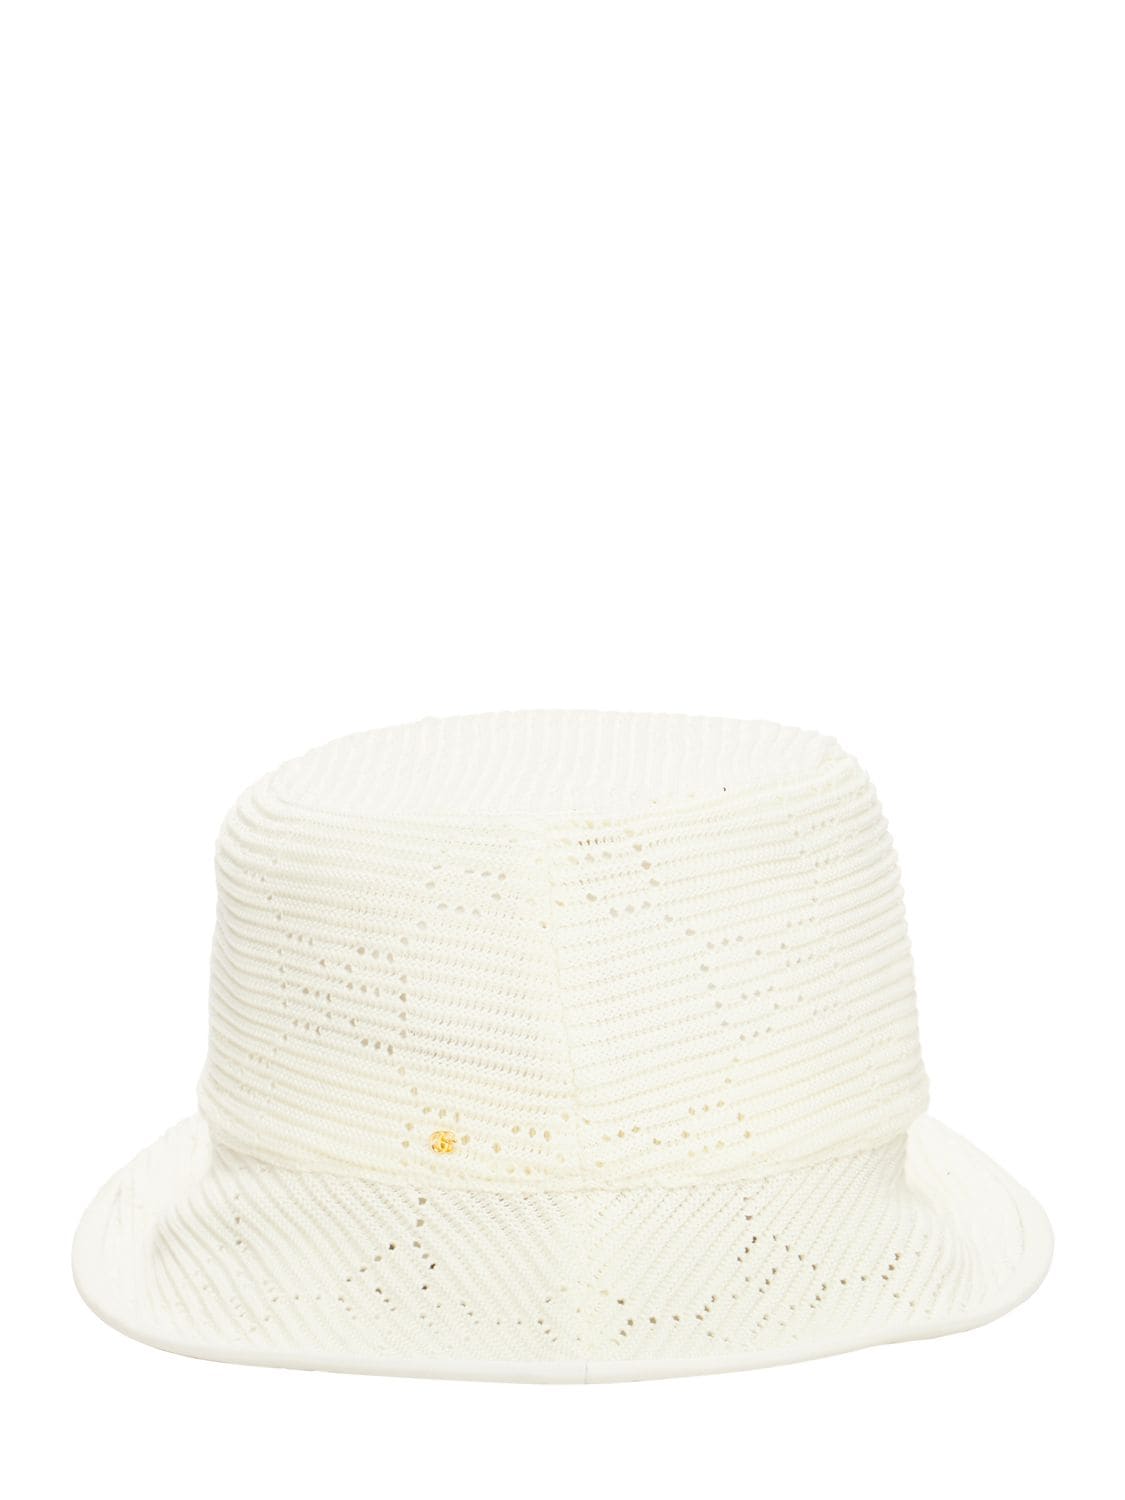 Gg Cable Knit Crochet Fedora Hat